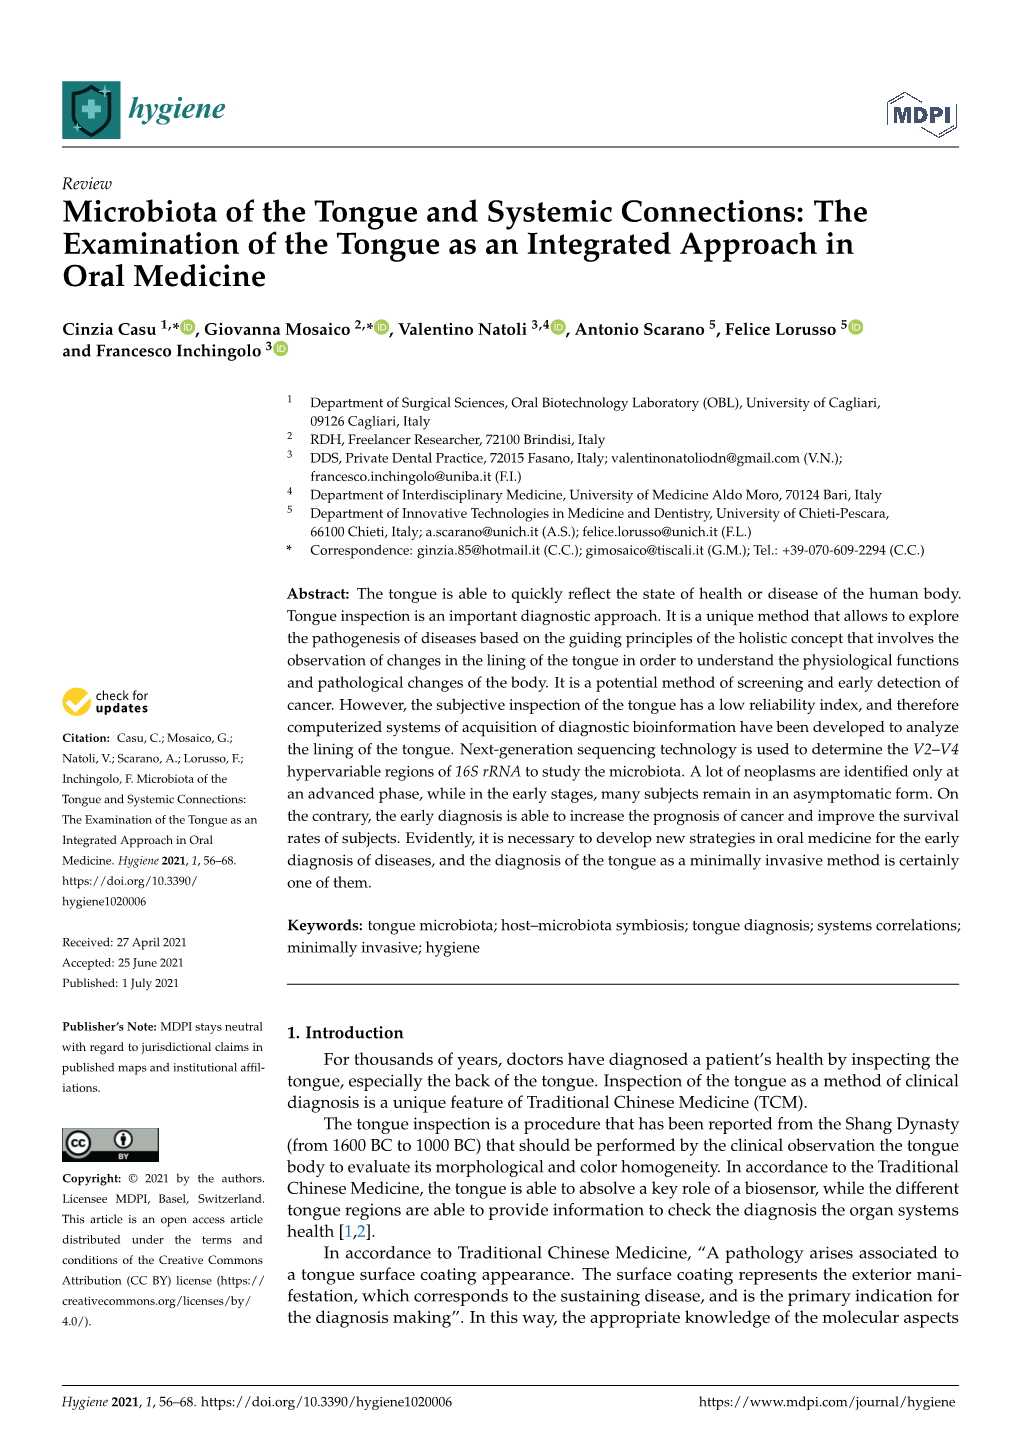 Microbiota of the Tongue and Systemic Connections: the Examination of the Tongue As an Integrated Approach in Oral Medicine